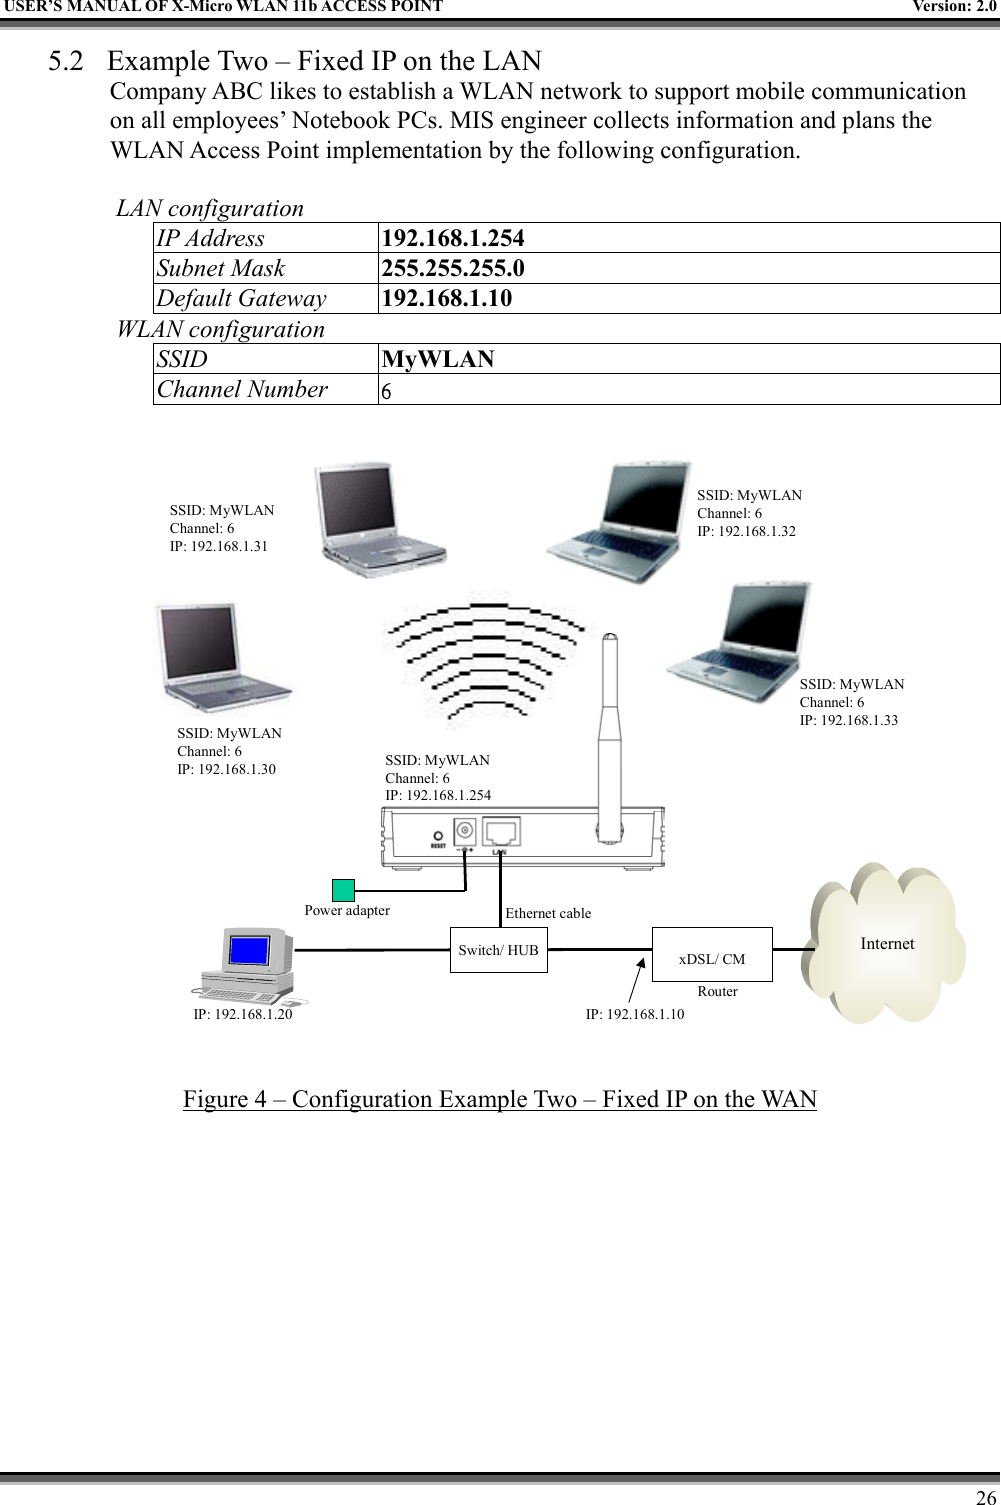   USER’S MANUAL OF X-Micro WLAN 11b ACCESS POINT  Version: 2.0 5.2  Example Two – Fixed IP on the LAN Company ABC likes to establish a WLAN network to support mobile communication on all employees’ Notebook PCs. MIS engineer collects information and plans the WLAN Access Point implementation by the following configuration.  LAN configuration IP Address  192.168.1.254 Subnet Mask  255.255.255.0 Default Gateway  192.168.1.10 WLAN configuration SSID  MyWLAN Channel Number  6 InternetxDSL/ CMPower adapter Ethernet cableSSID: MyWLANChannel: 6 IP: 192.168.1.33SSID: MyWLANChannel: 6 IP: 192.168.1.32SSID: MyWLANChannel: 6 IP: 192.168.1.31SSID: MyWLANChannel: 6 IP: 192.168.1.30 SSID: MyWLANChannel: 6IP: 192.168.1.254IP: 192.168.1.20Switch/ HUBRouterIP: 192.168.1.10 Figure 4 – Configuration Example Two – Fixed IP on the WAN      26 